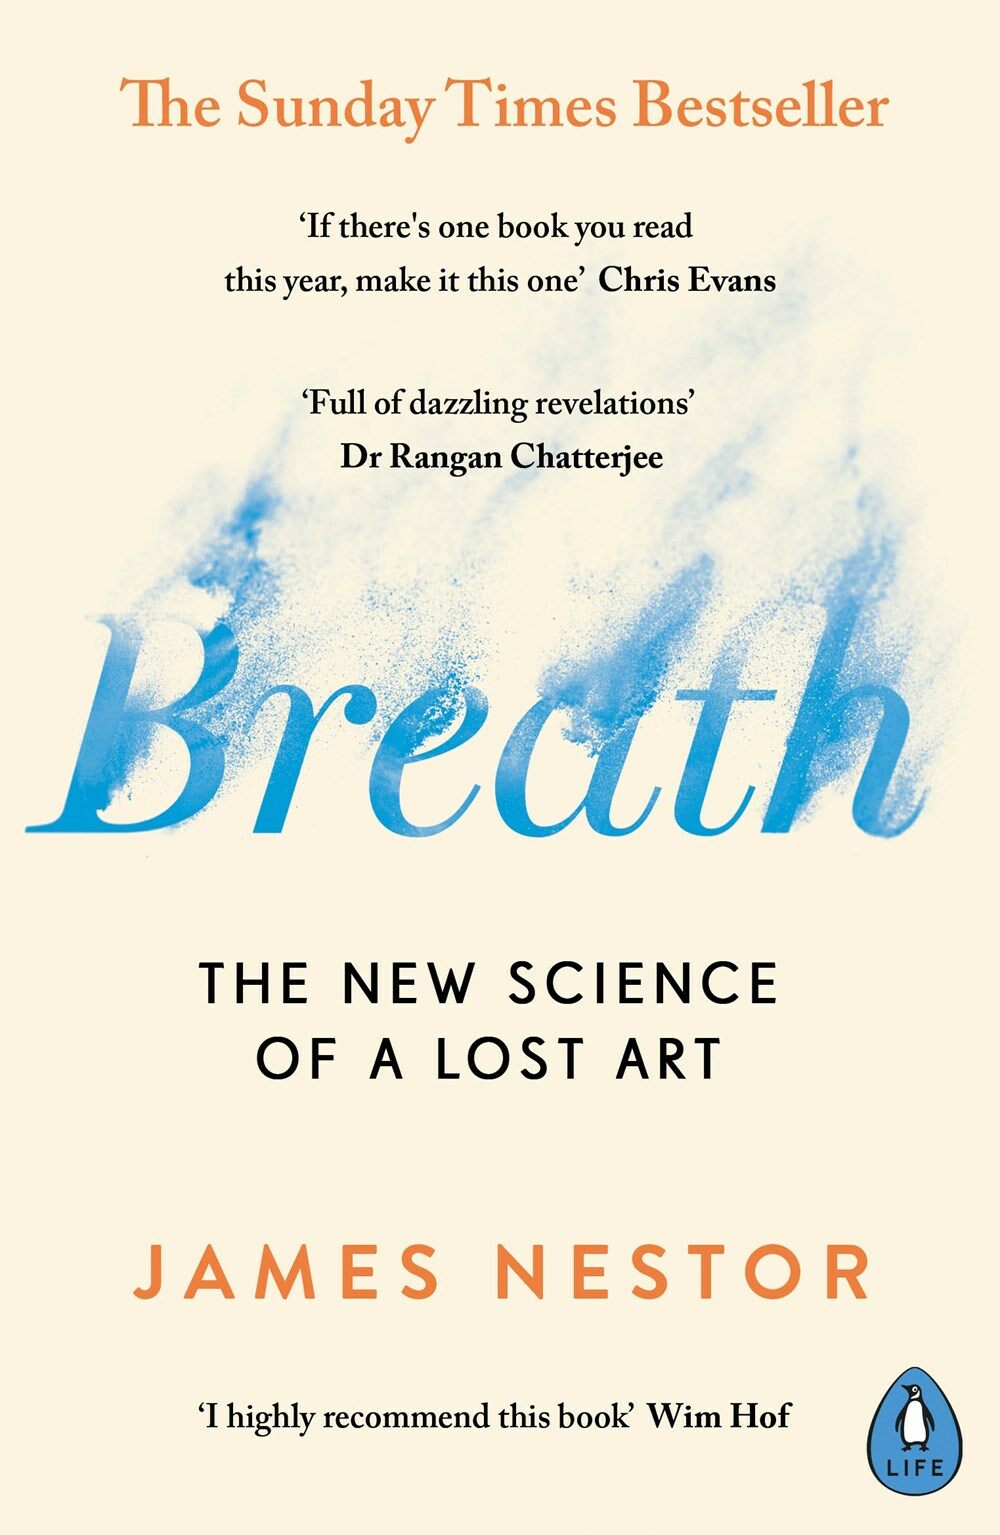 Breath : The New Science of a Lost Art (Paperback)